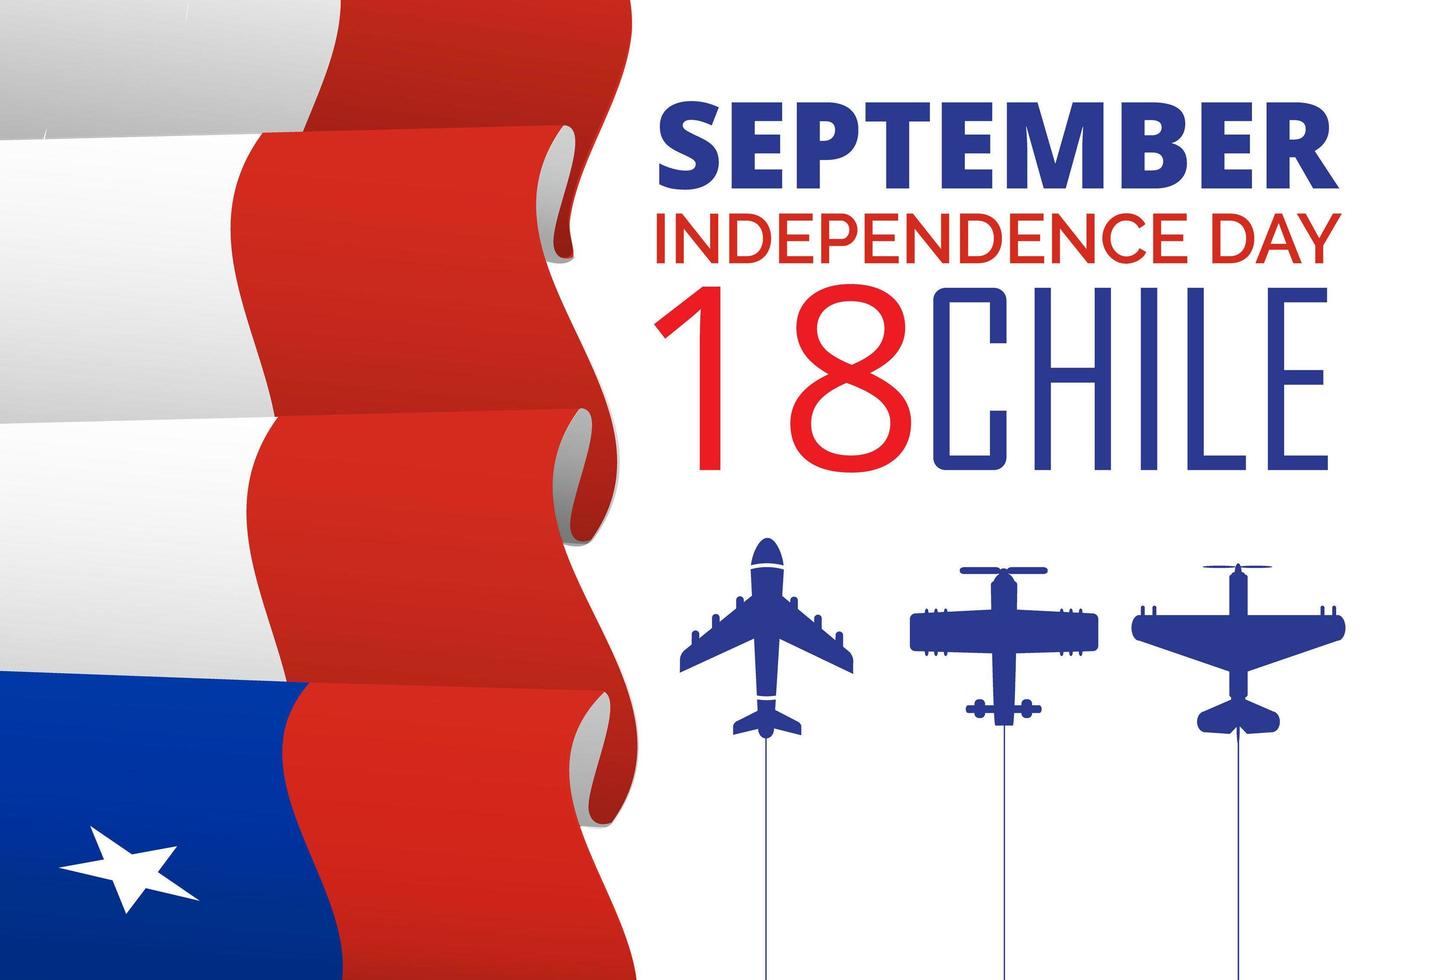 Chile Independence Day celebrated in September 18. Freedom day is famous national event. vector